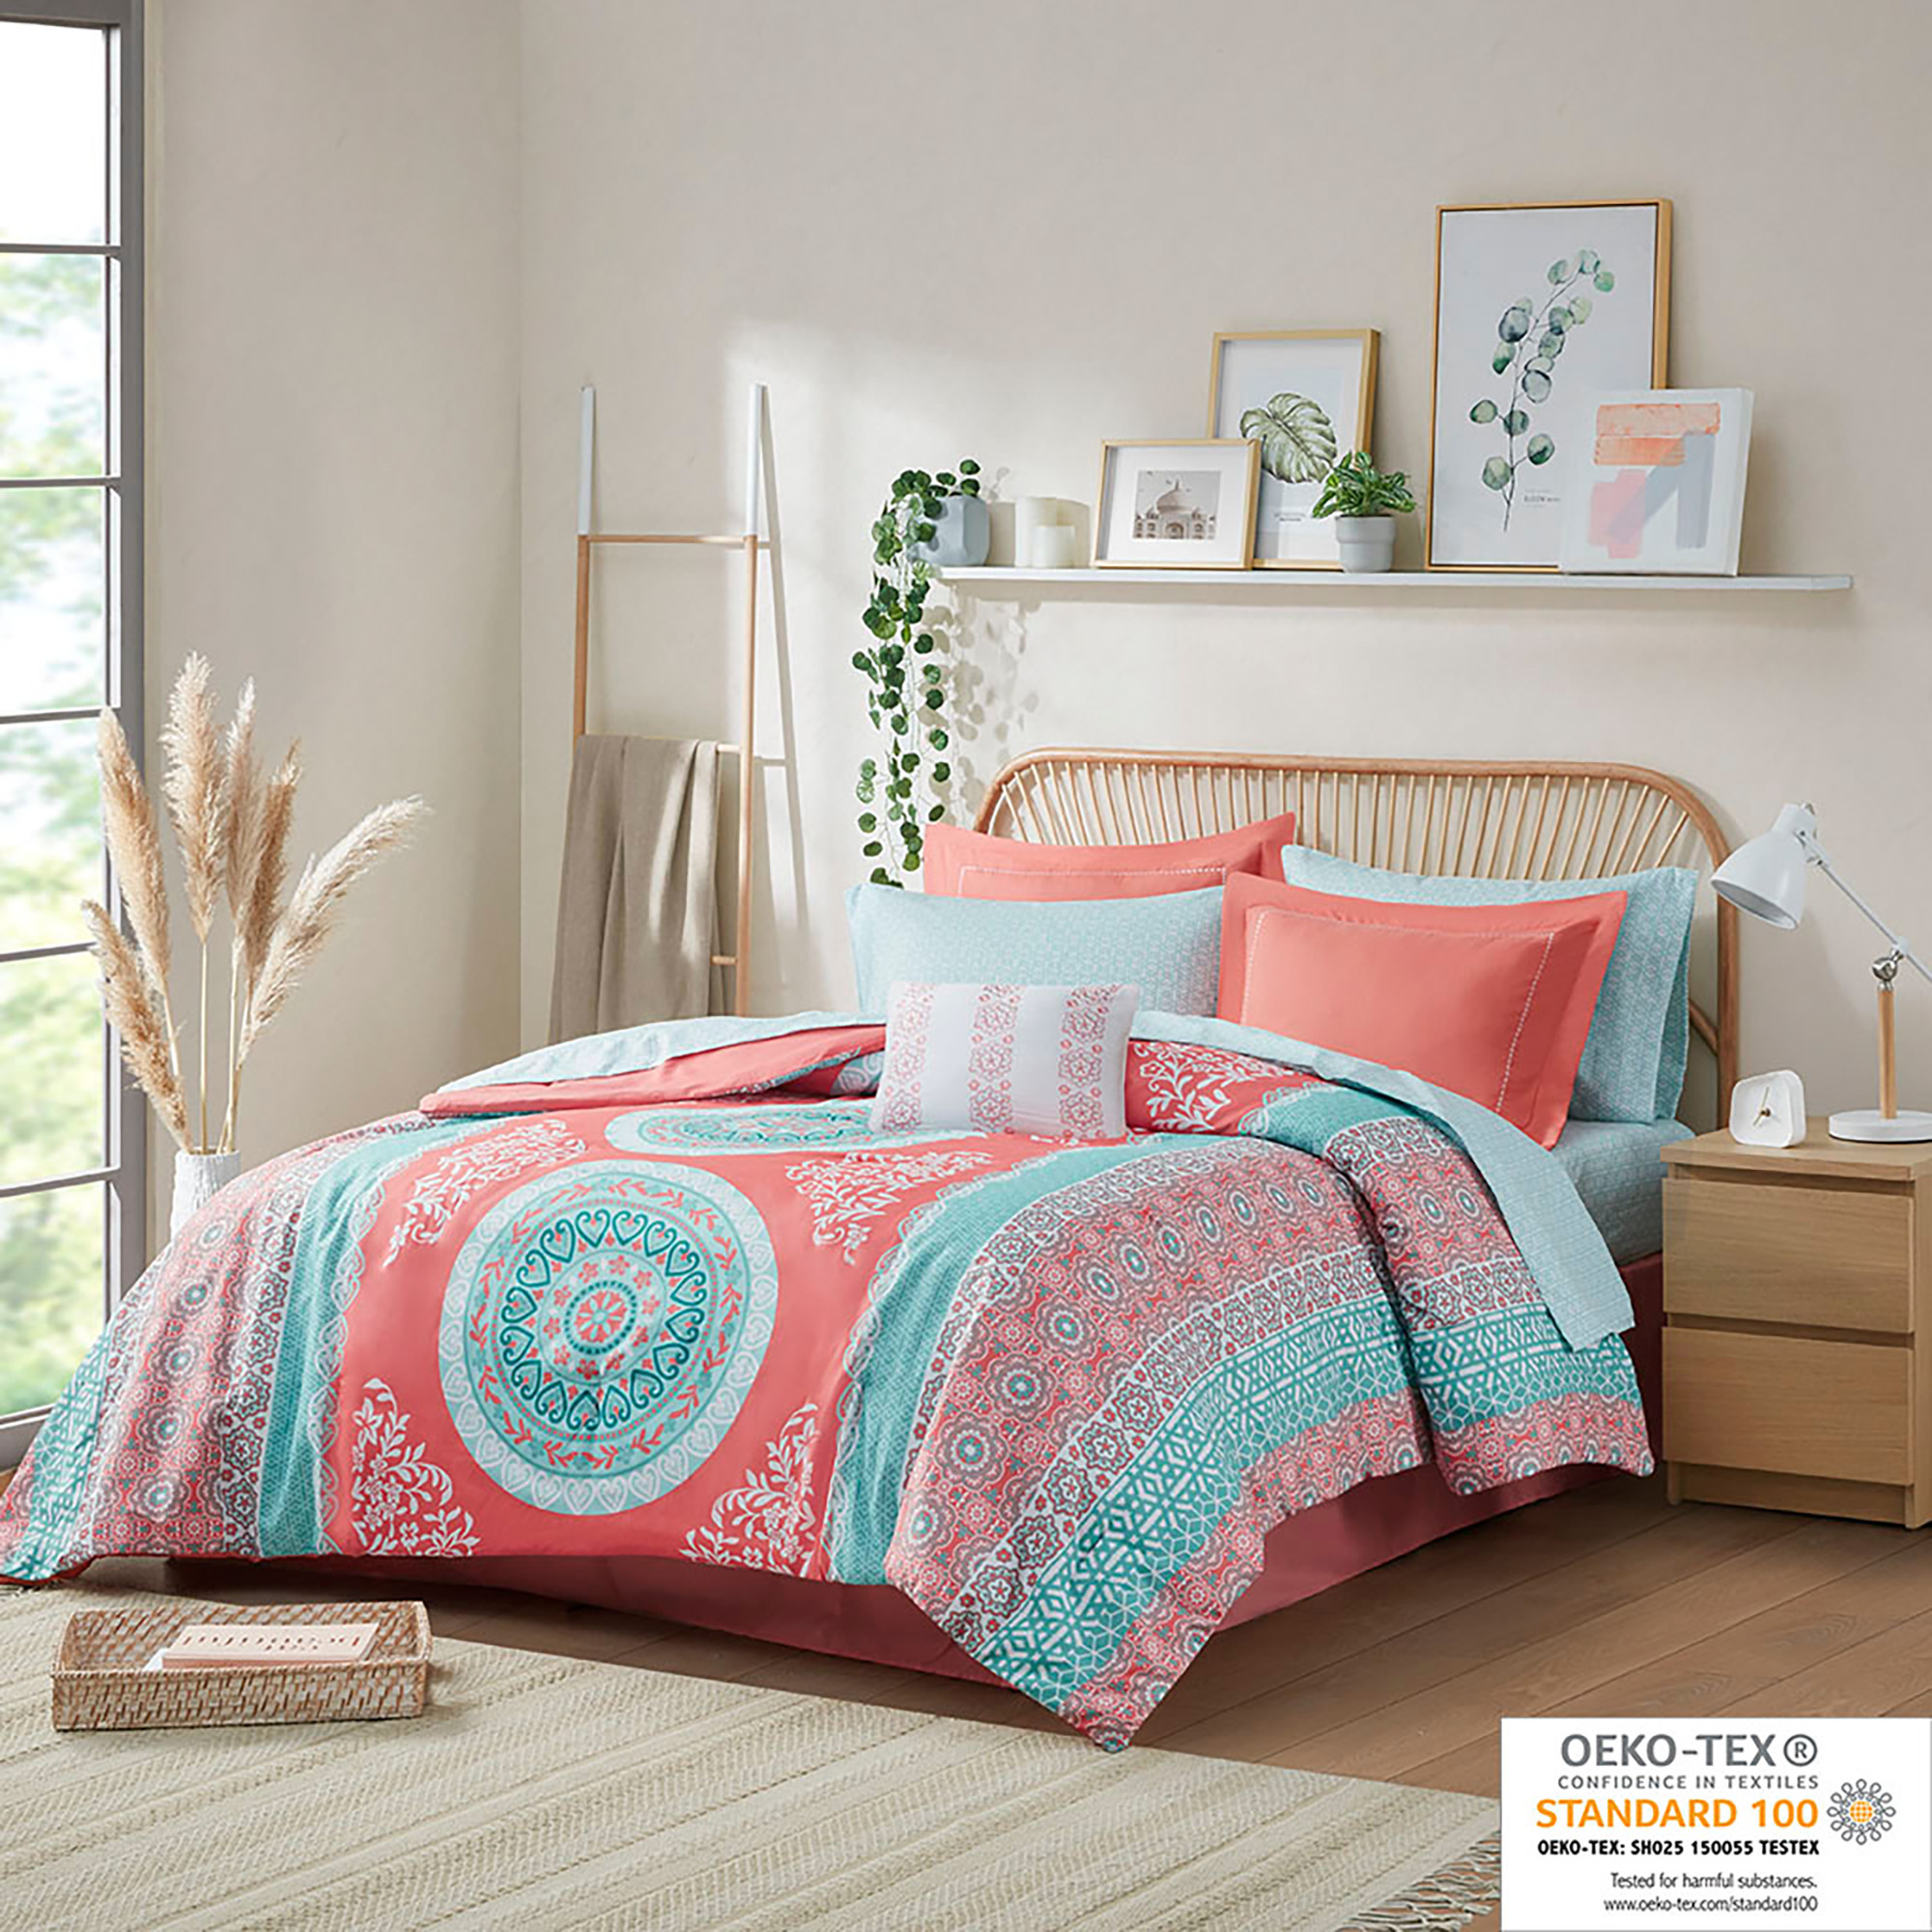 Intelligent Design 9-Piece Queen Comforter Sets with Sheet Bed in a Bag Coral Medallion Print Bedding Sets - image 3 of 12